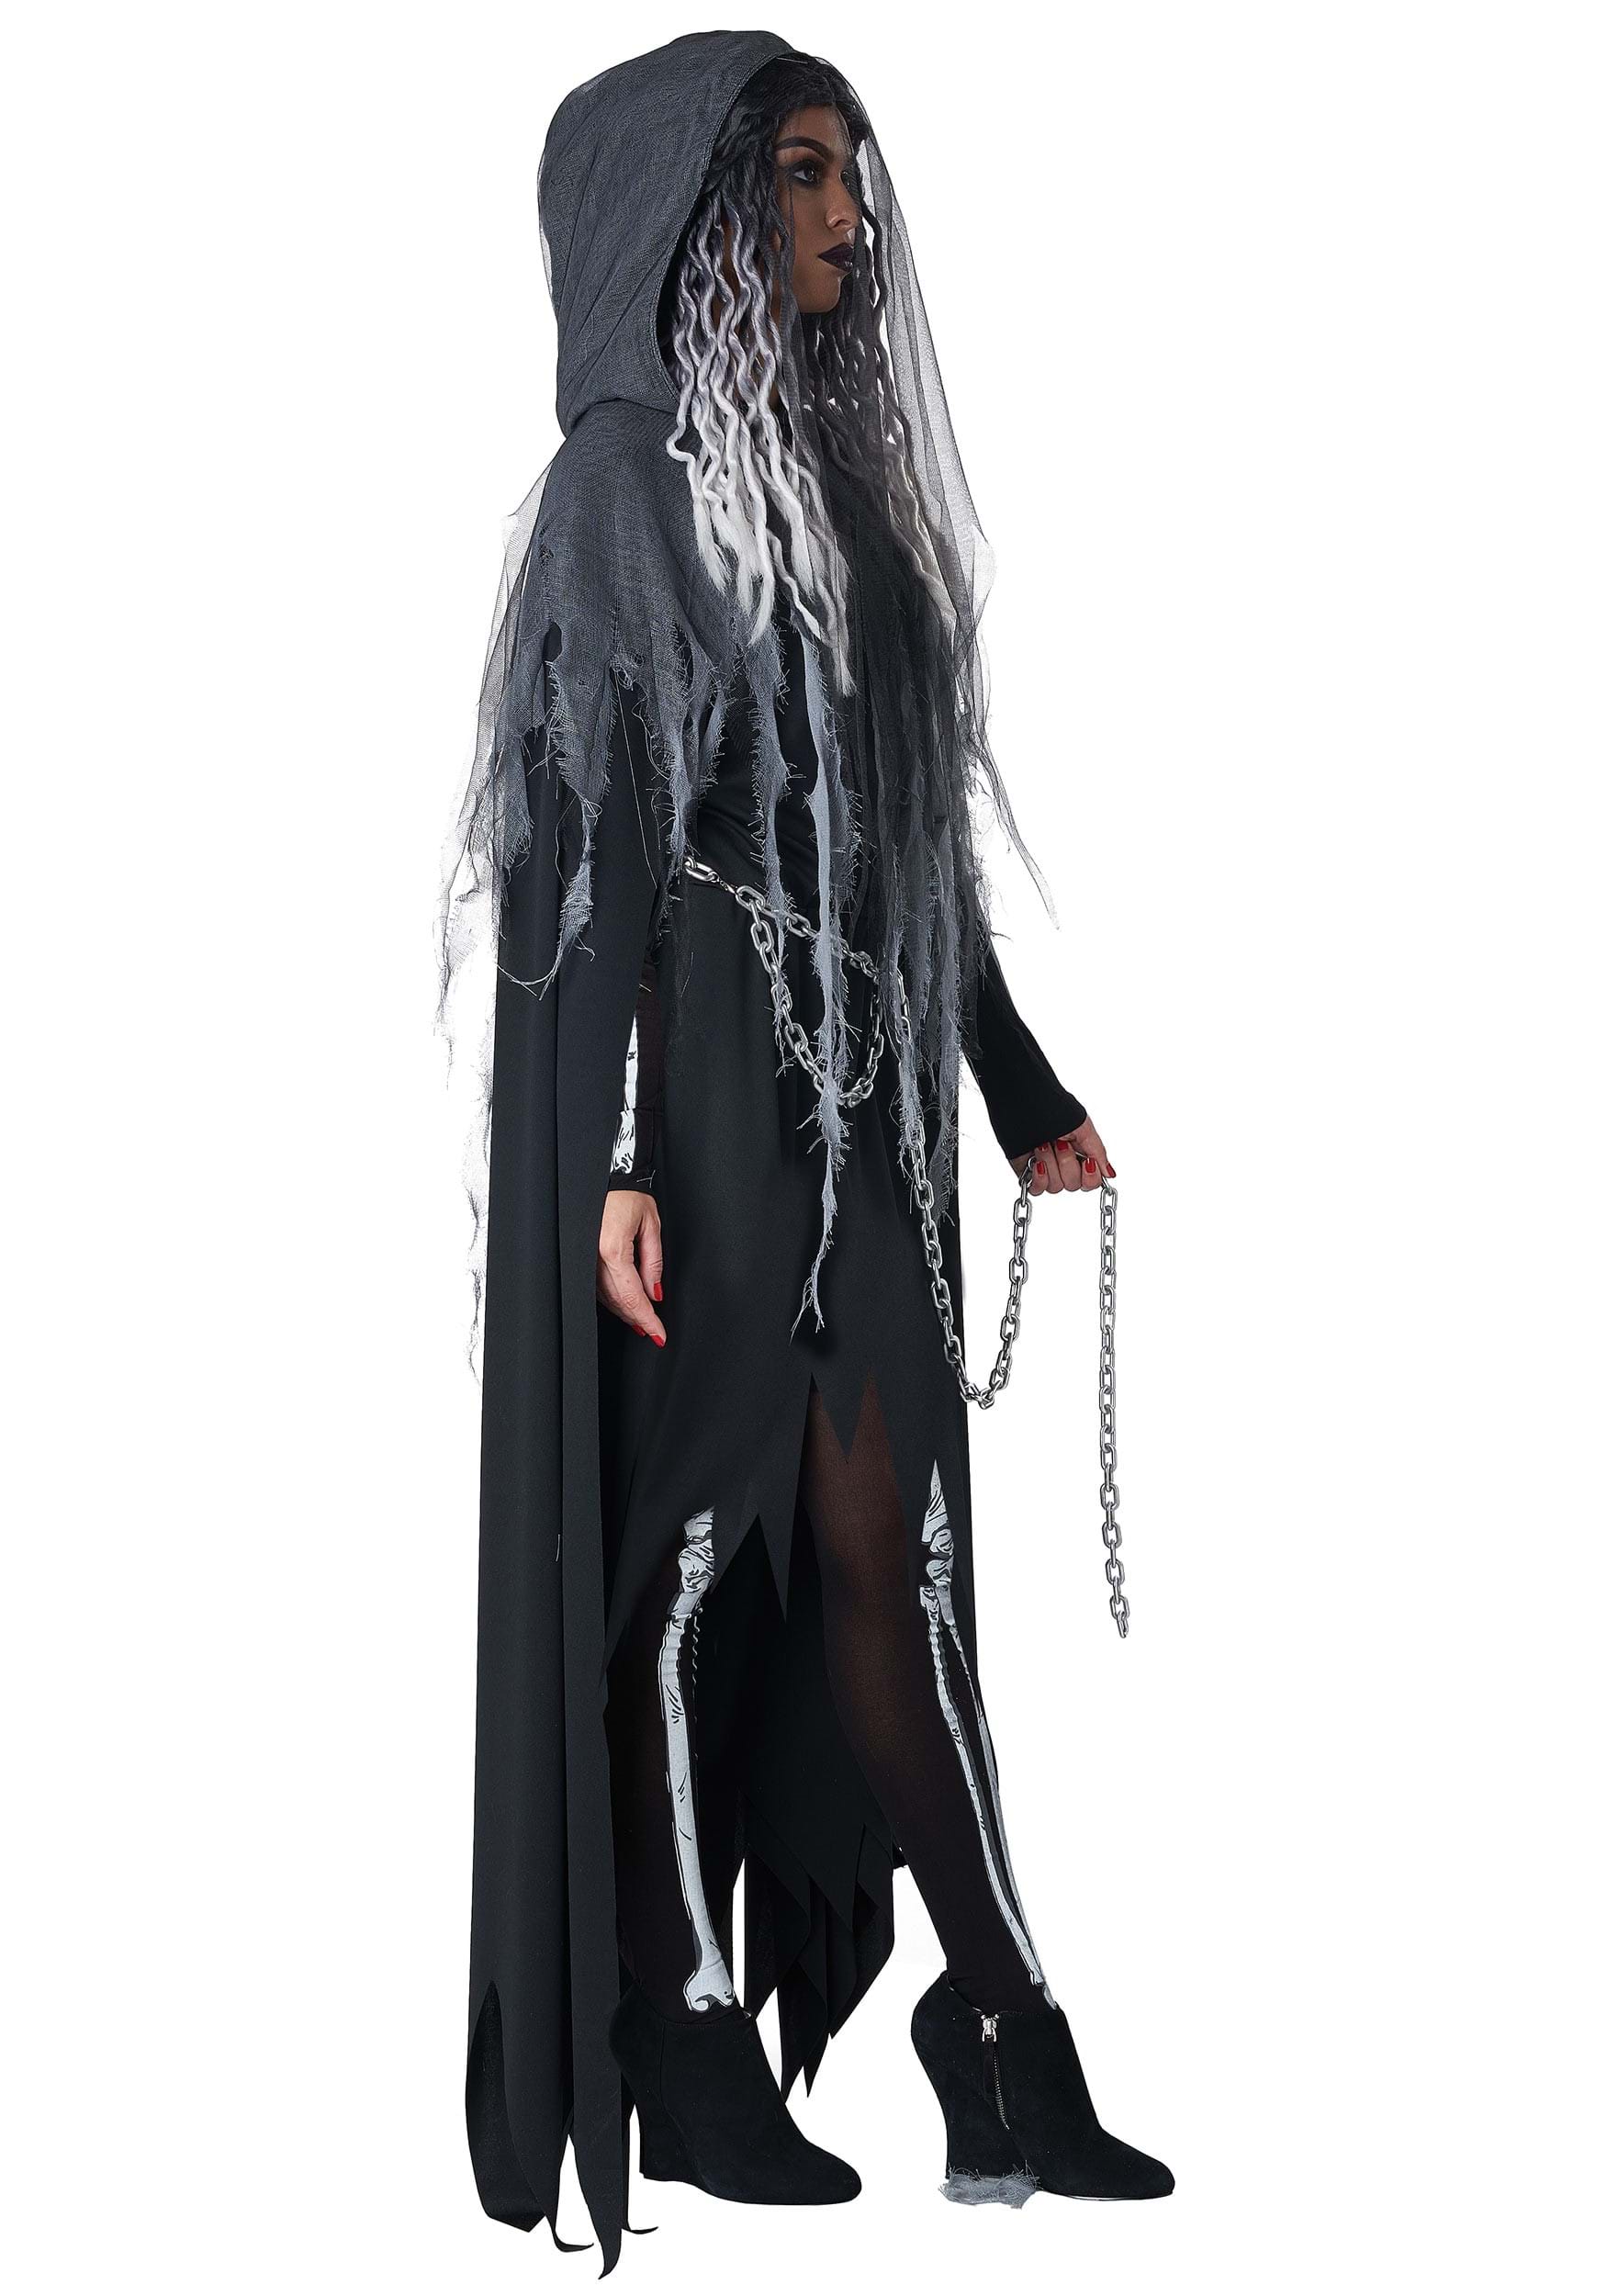  Miss Reaper Tween Costume : Clothing, Shoes & Jewelry